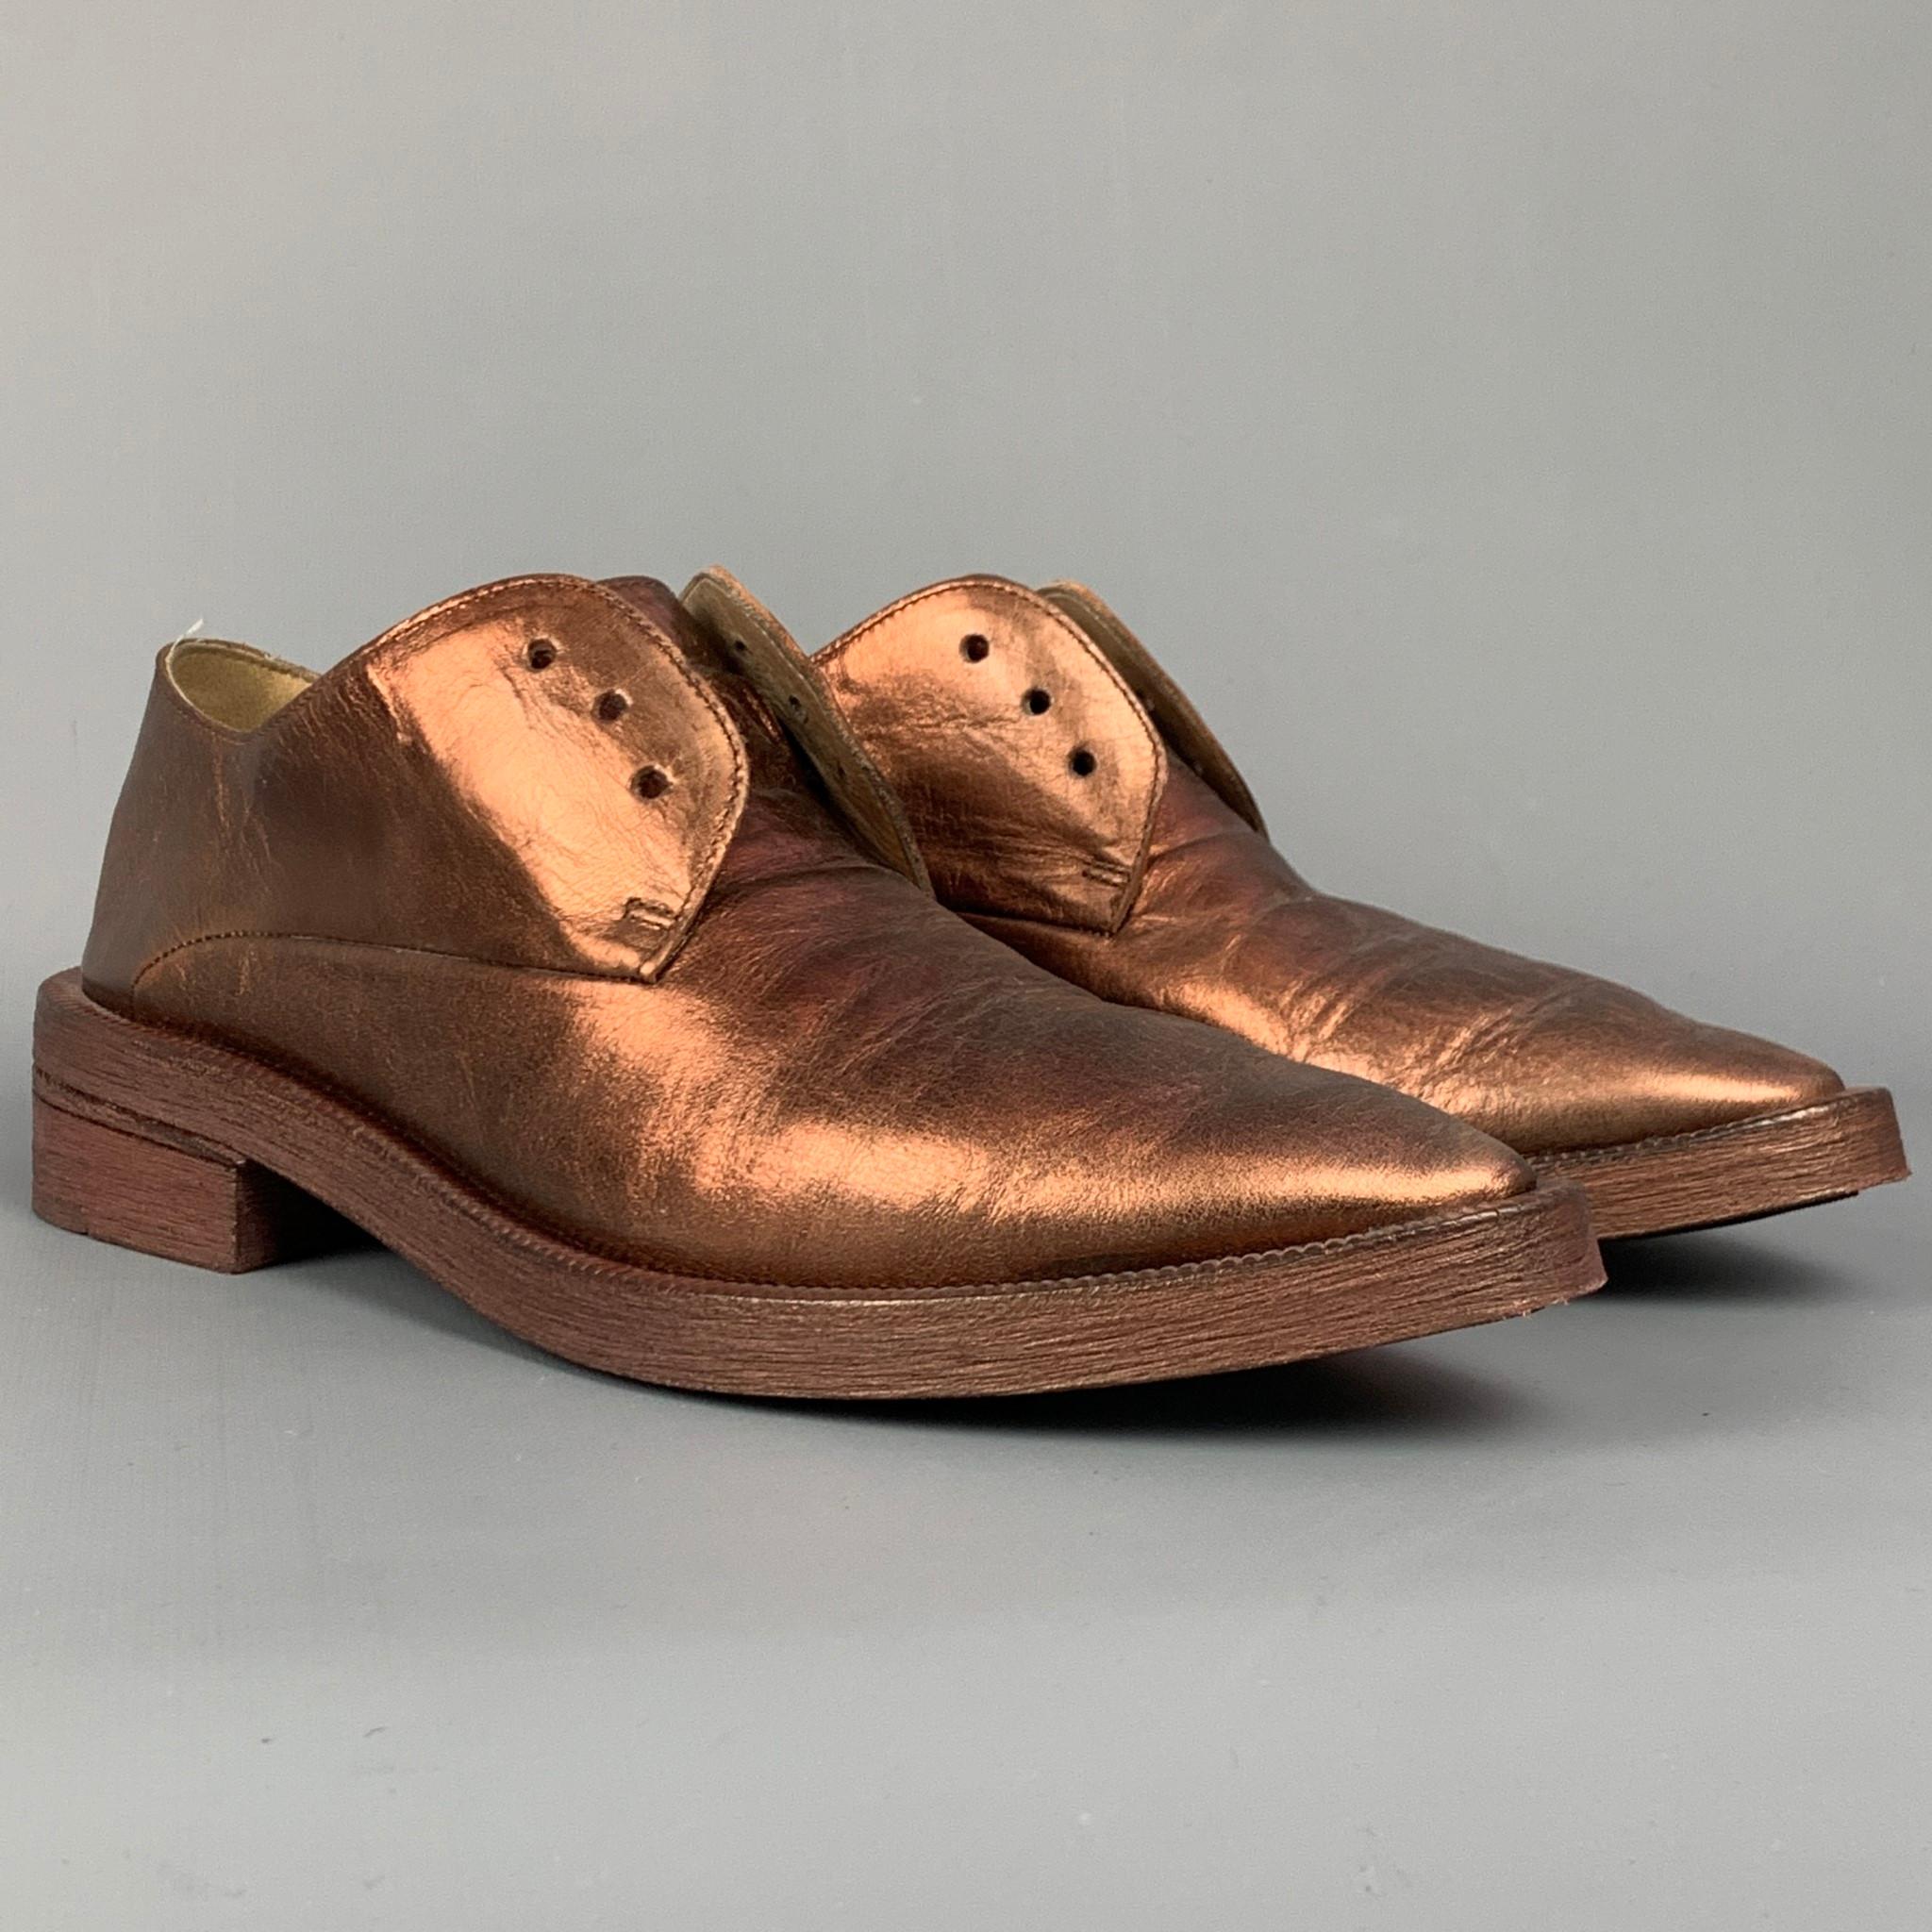 MARSELL flat laces comes in a copper leather featuring a narrow toe, lace up hole details, and a wooden sole. Shoelaces are not included. Made in Italy.

Very Good Pre-Owned Condition.
Marked: EU 37.5

Outsole:

3.75 in. x 11 in. 